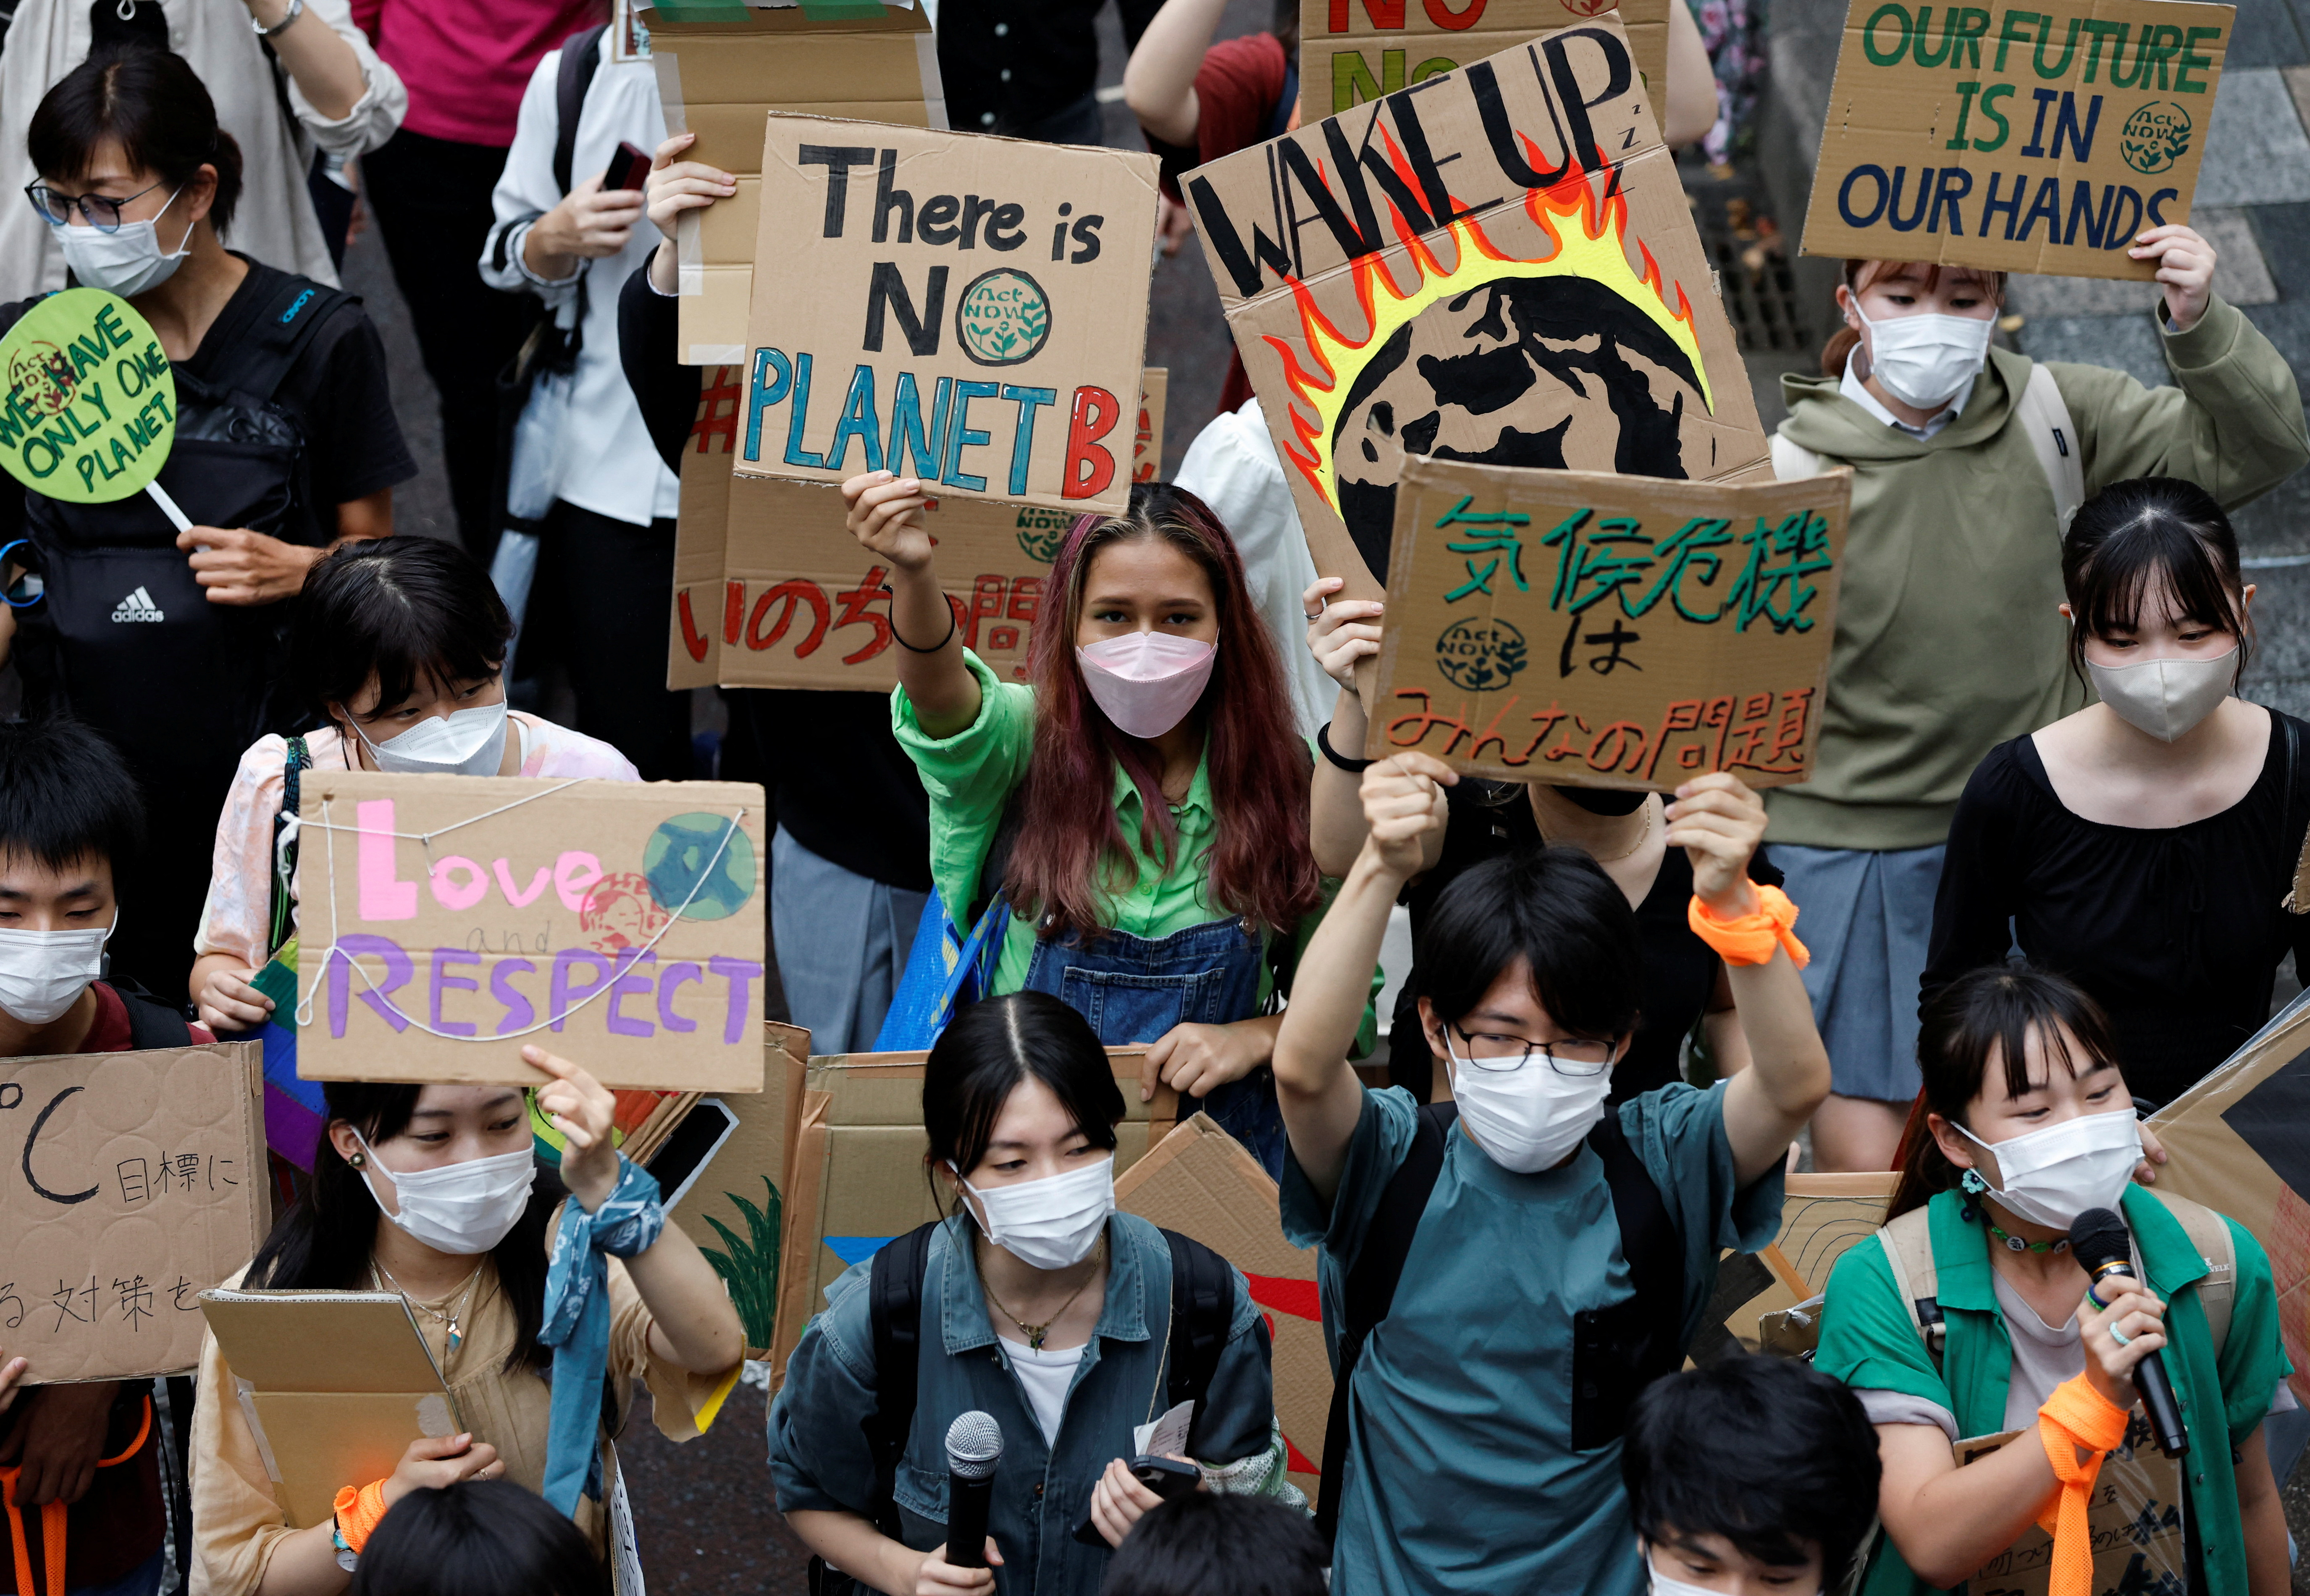 People raise placards as they take part in a global climate protest march, at Omotesando district in Tokyo